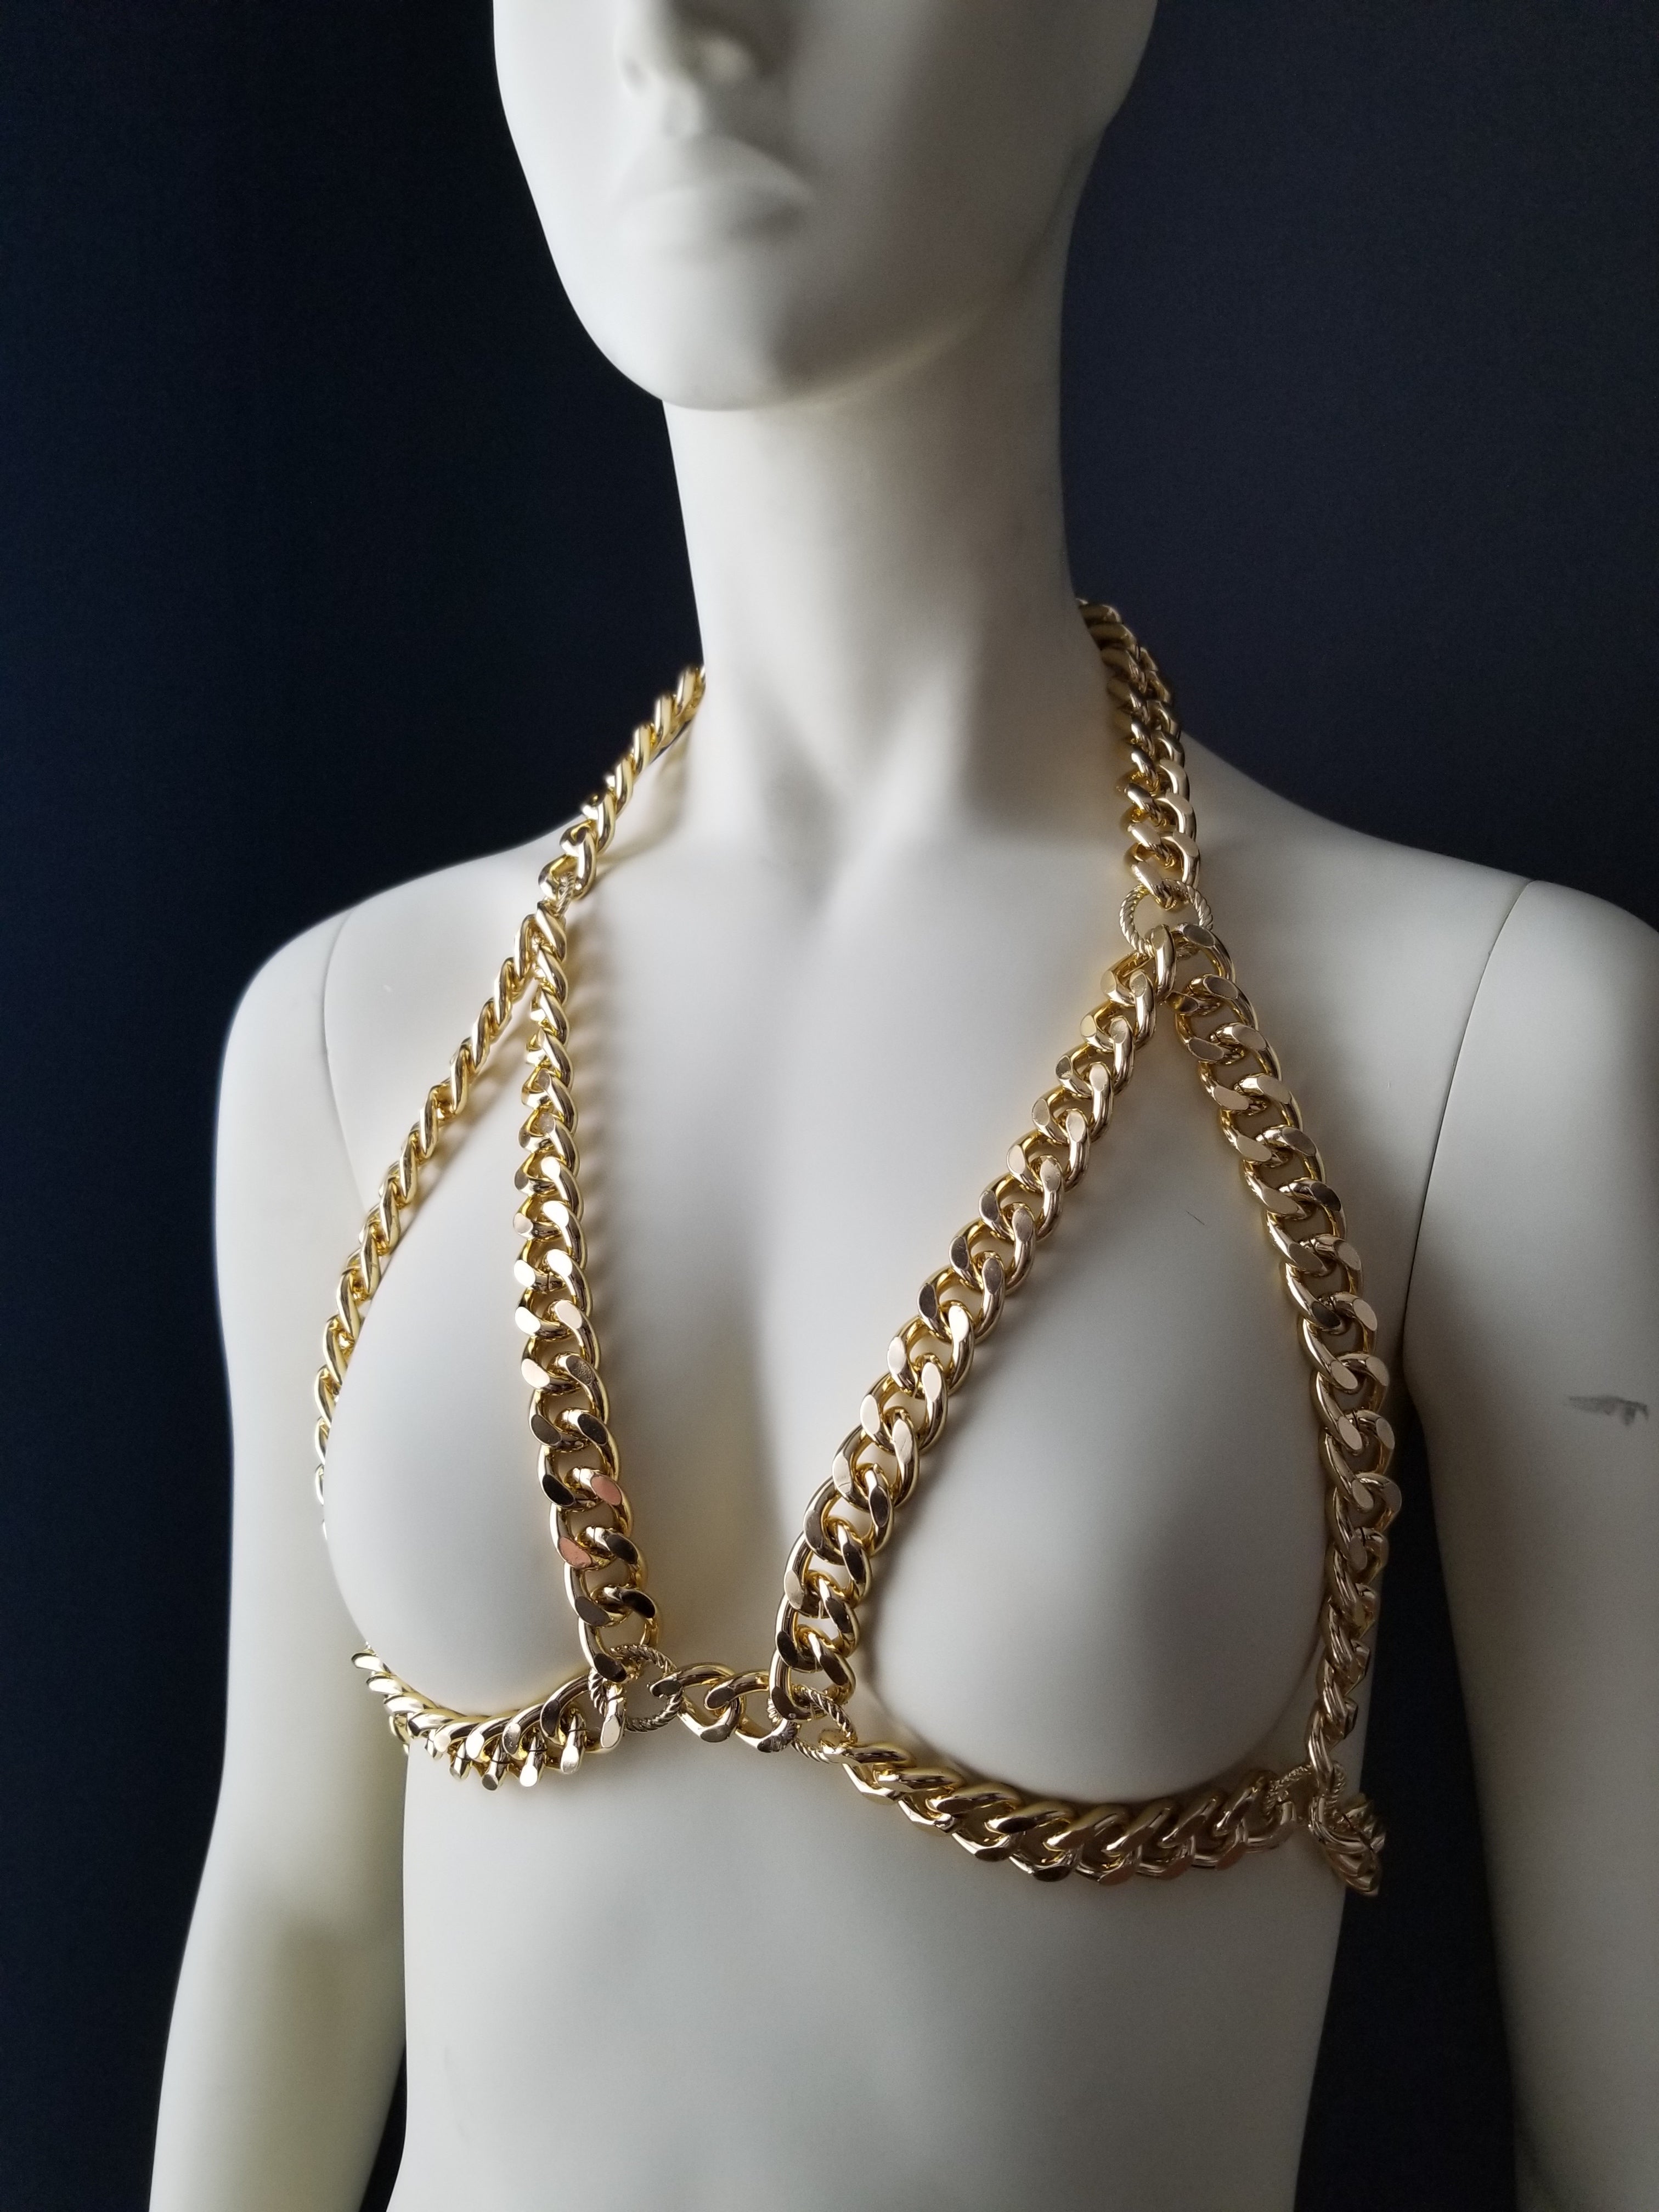 Shop the baddest brand for your bdsm inspired chain accessories, from day collar chain leash for women and men to harness and chain lingerie. We have the designs that will stand out and make a statement. Inspired by fetishwear and bondage gear, we add a high fashion esthetic to that punk rock, dominatrix, kink styles